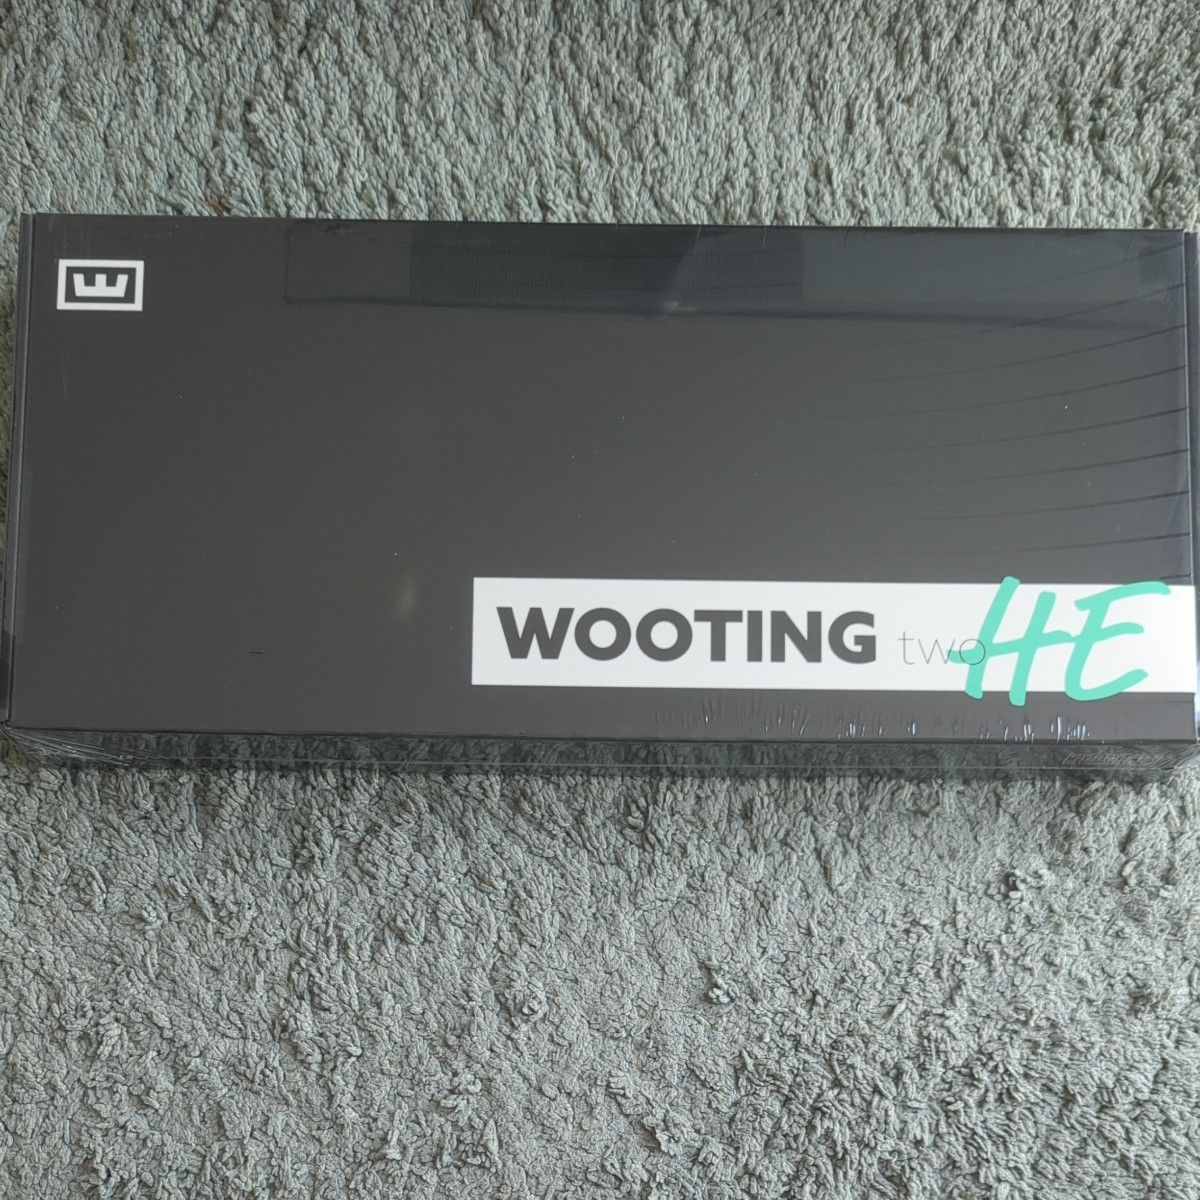 wooting two he US配列 新品未使用